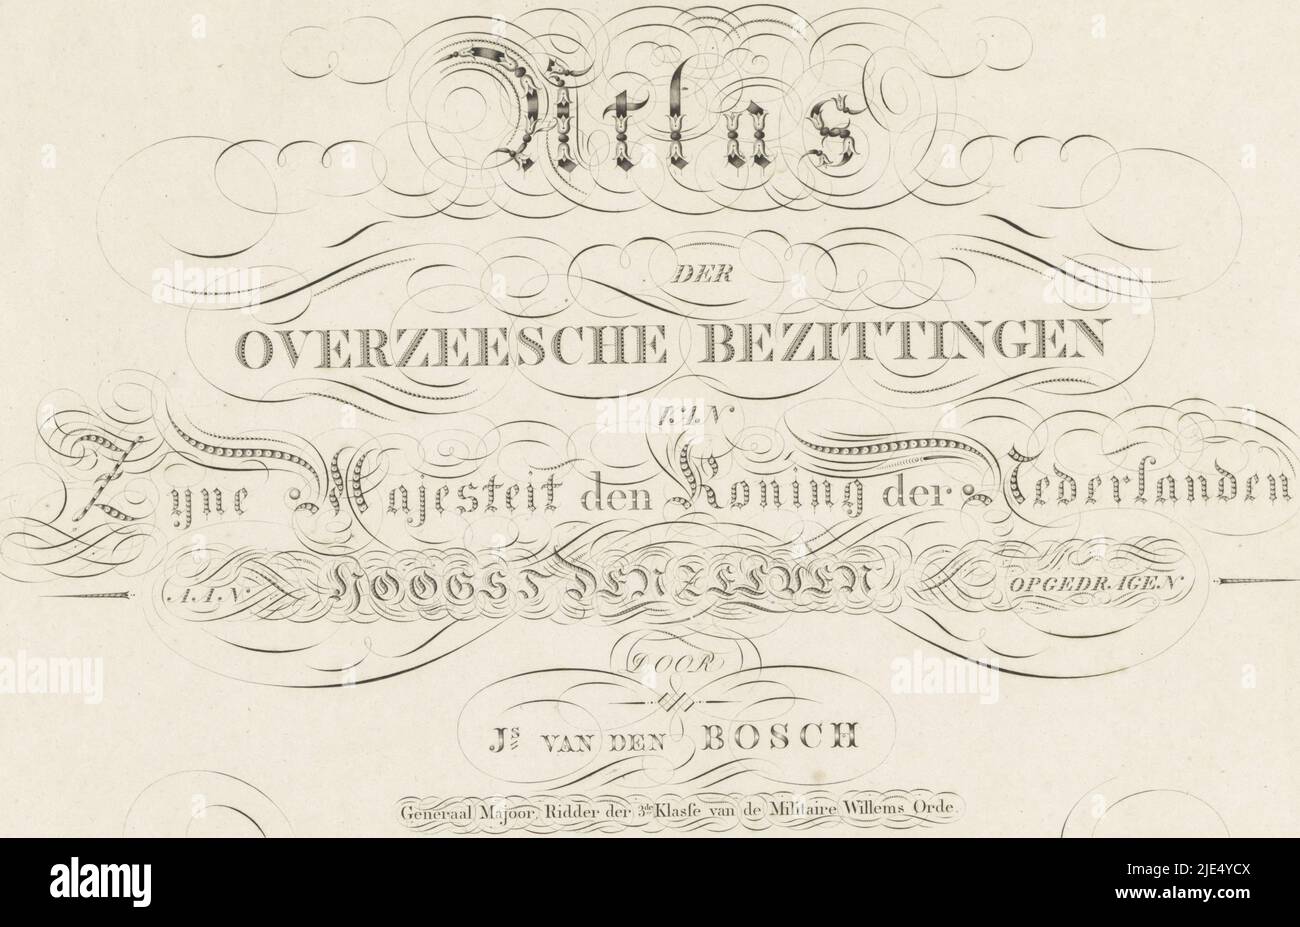 Title print for the Atlas of Dutch Overseas Possessions, 1817 Atlas of the Overseas Possessions of His Majesty the King of the Netherlands, print maker: Jan Gerritsz. Visser, (mentioned on object), publisher: Gebroeders van Cleef, (mentioned on object), 1817, paper, engraving, h 375 mm × w 528 mm Stock Photo